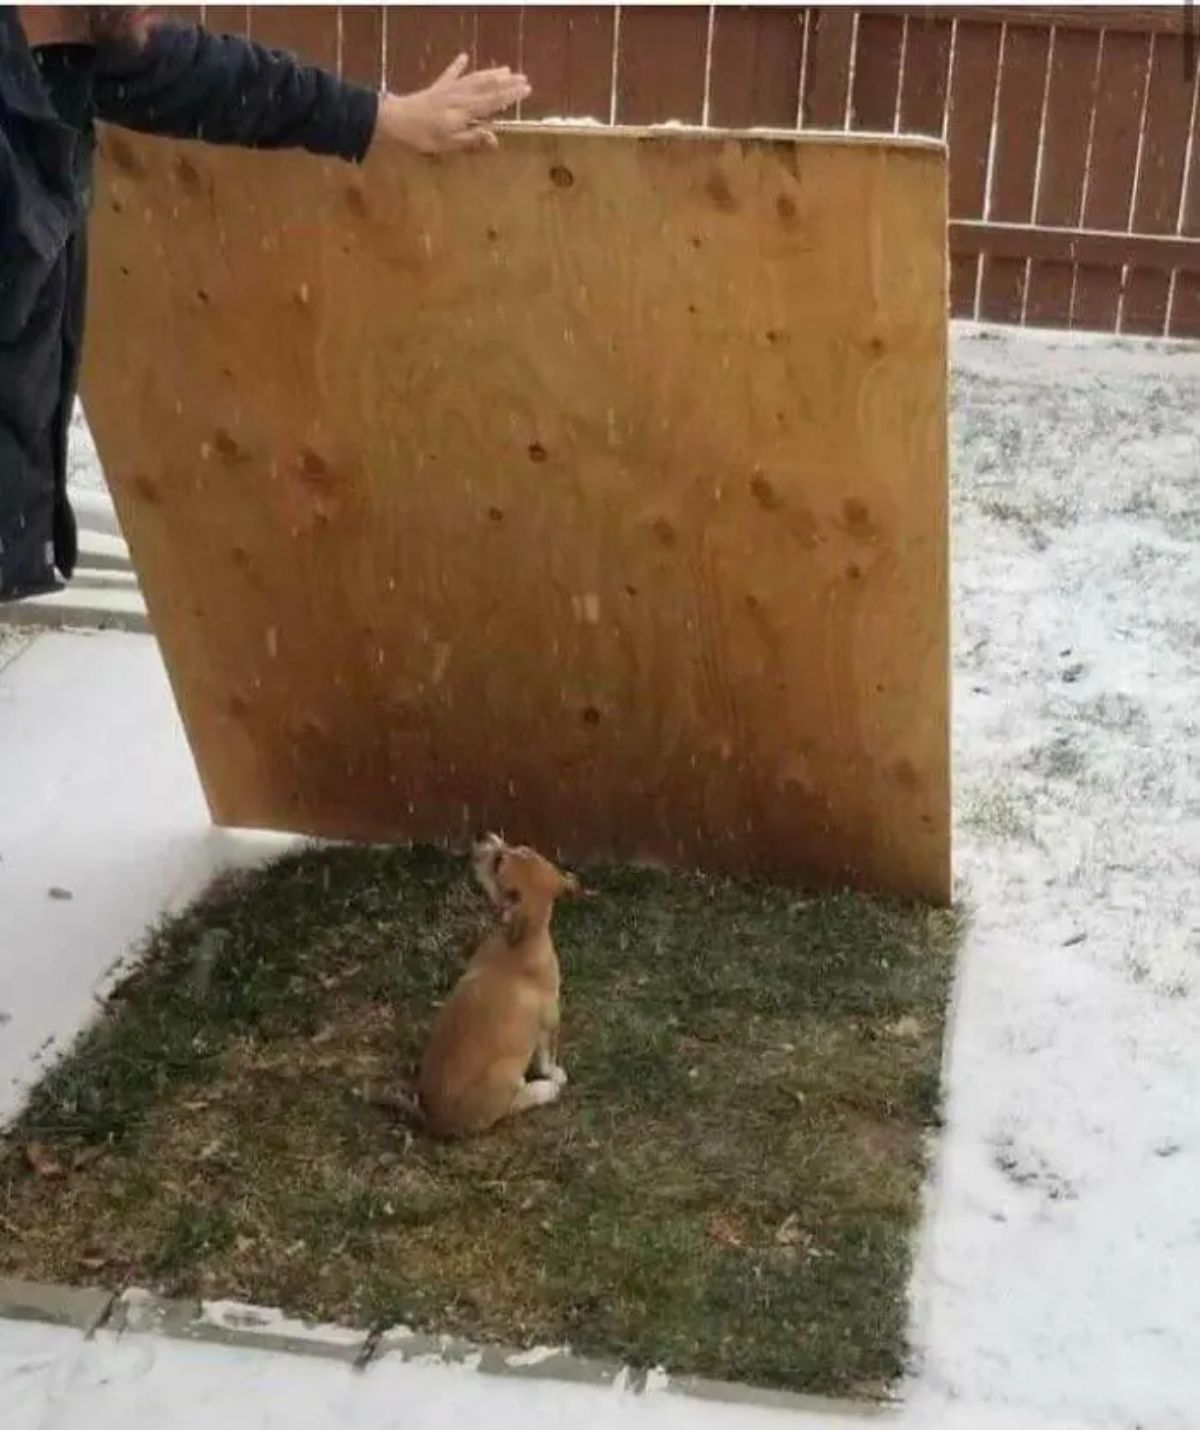 brown chihuahua sitting on a grassy spot in an otherwise snow covered garden with someone holding a large piece of plywood over the dog